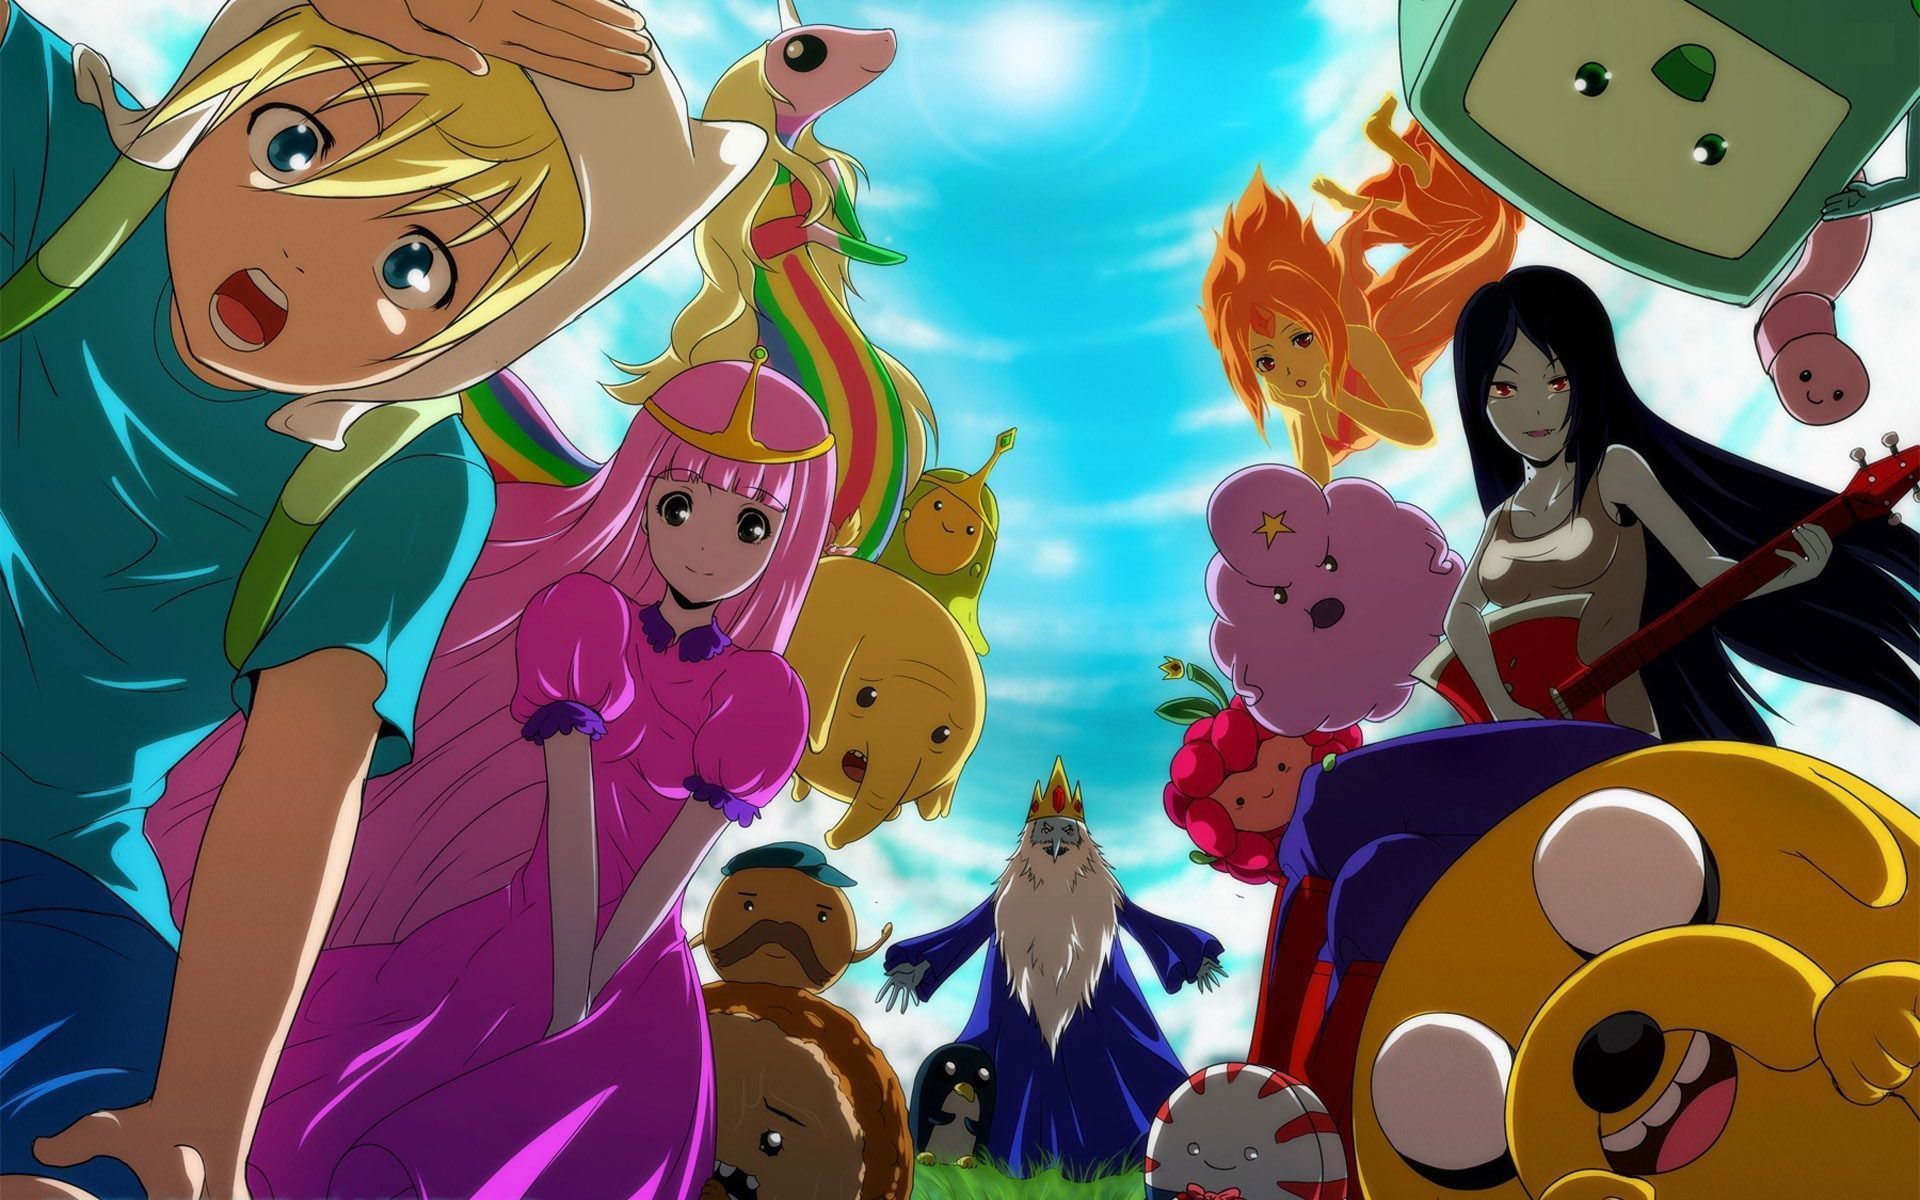 Adventure Time characters, including Finn, Princess Bubblegum, and Jake, are shown in a group shot. - Adventure Time